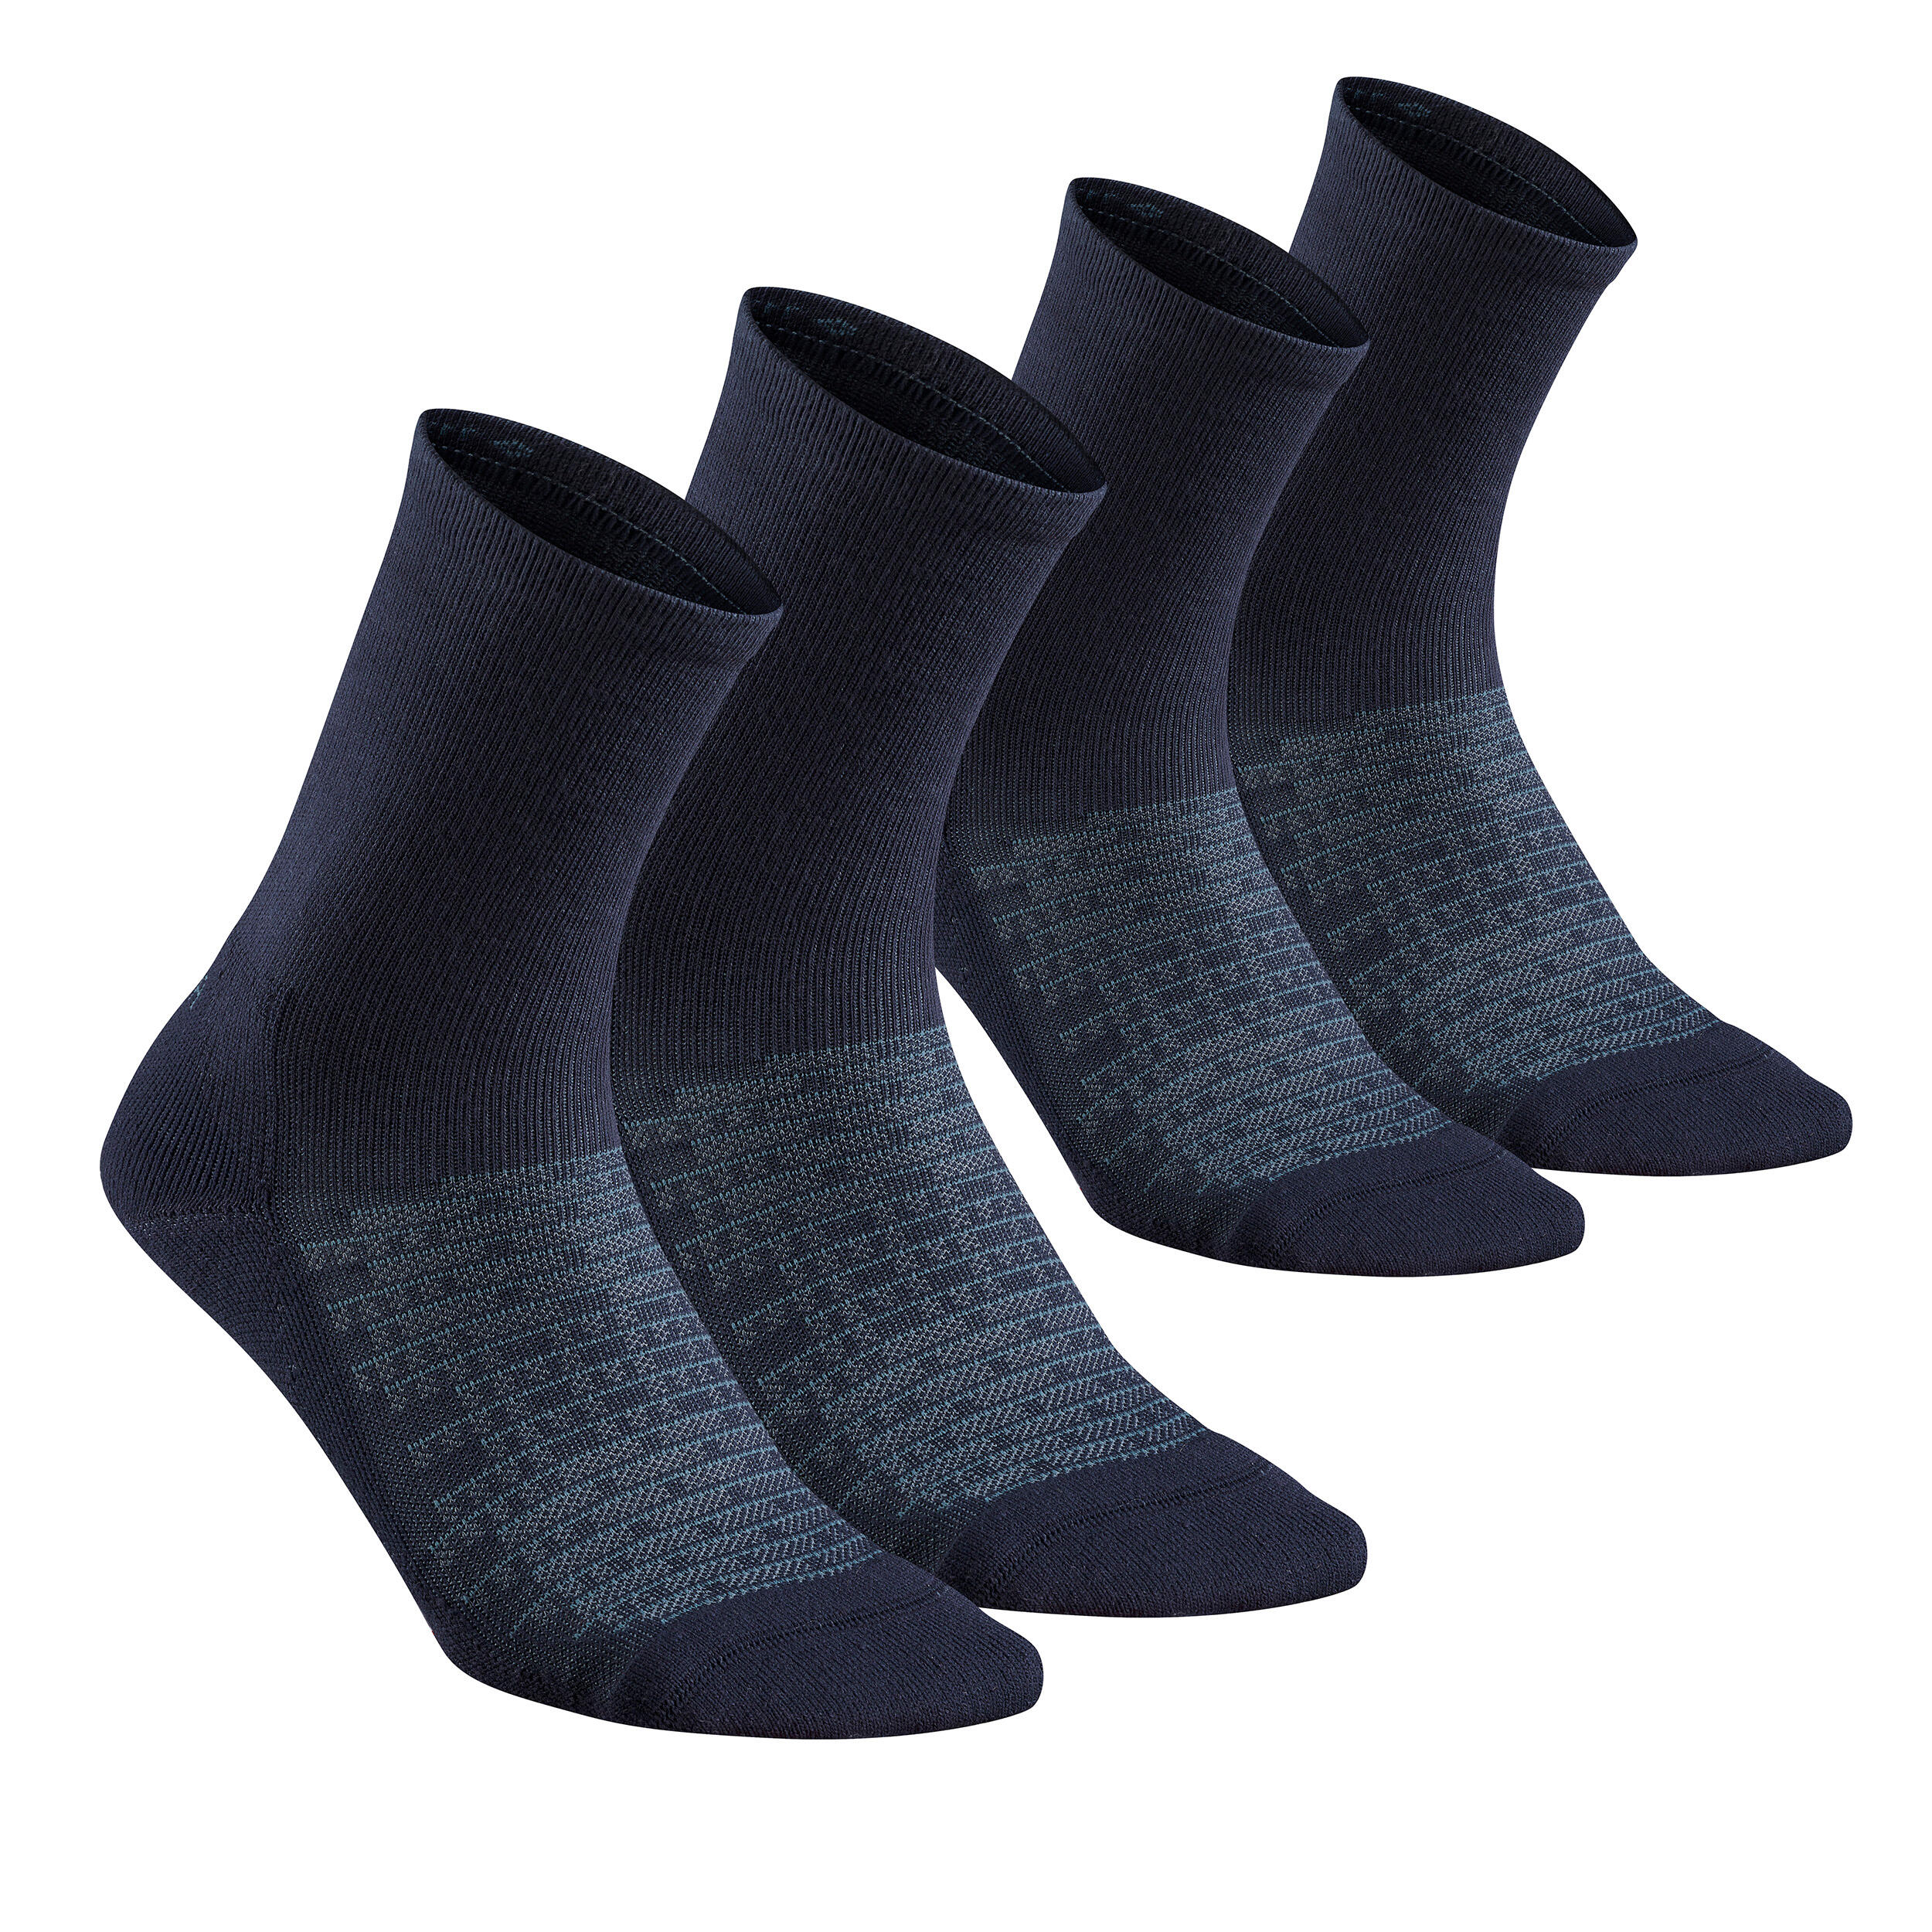 QUECHUA Sock Hike 100 High  - Pack of 2 pairs - Navy Blue